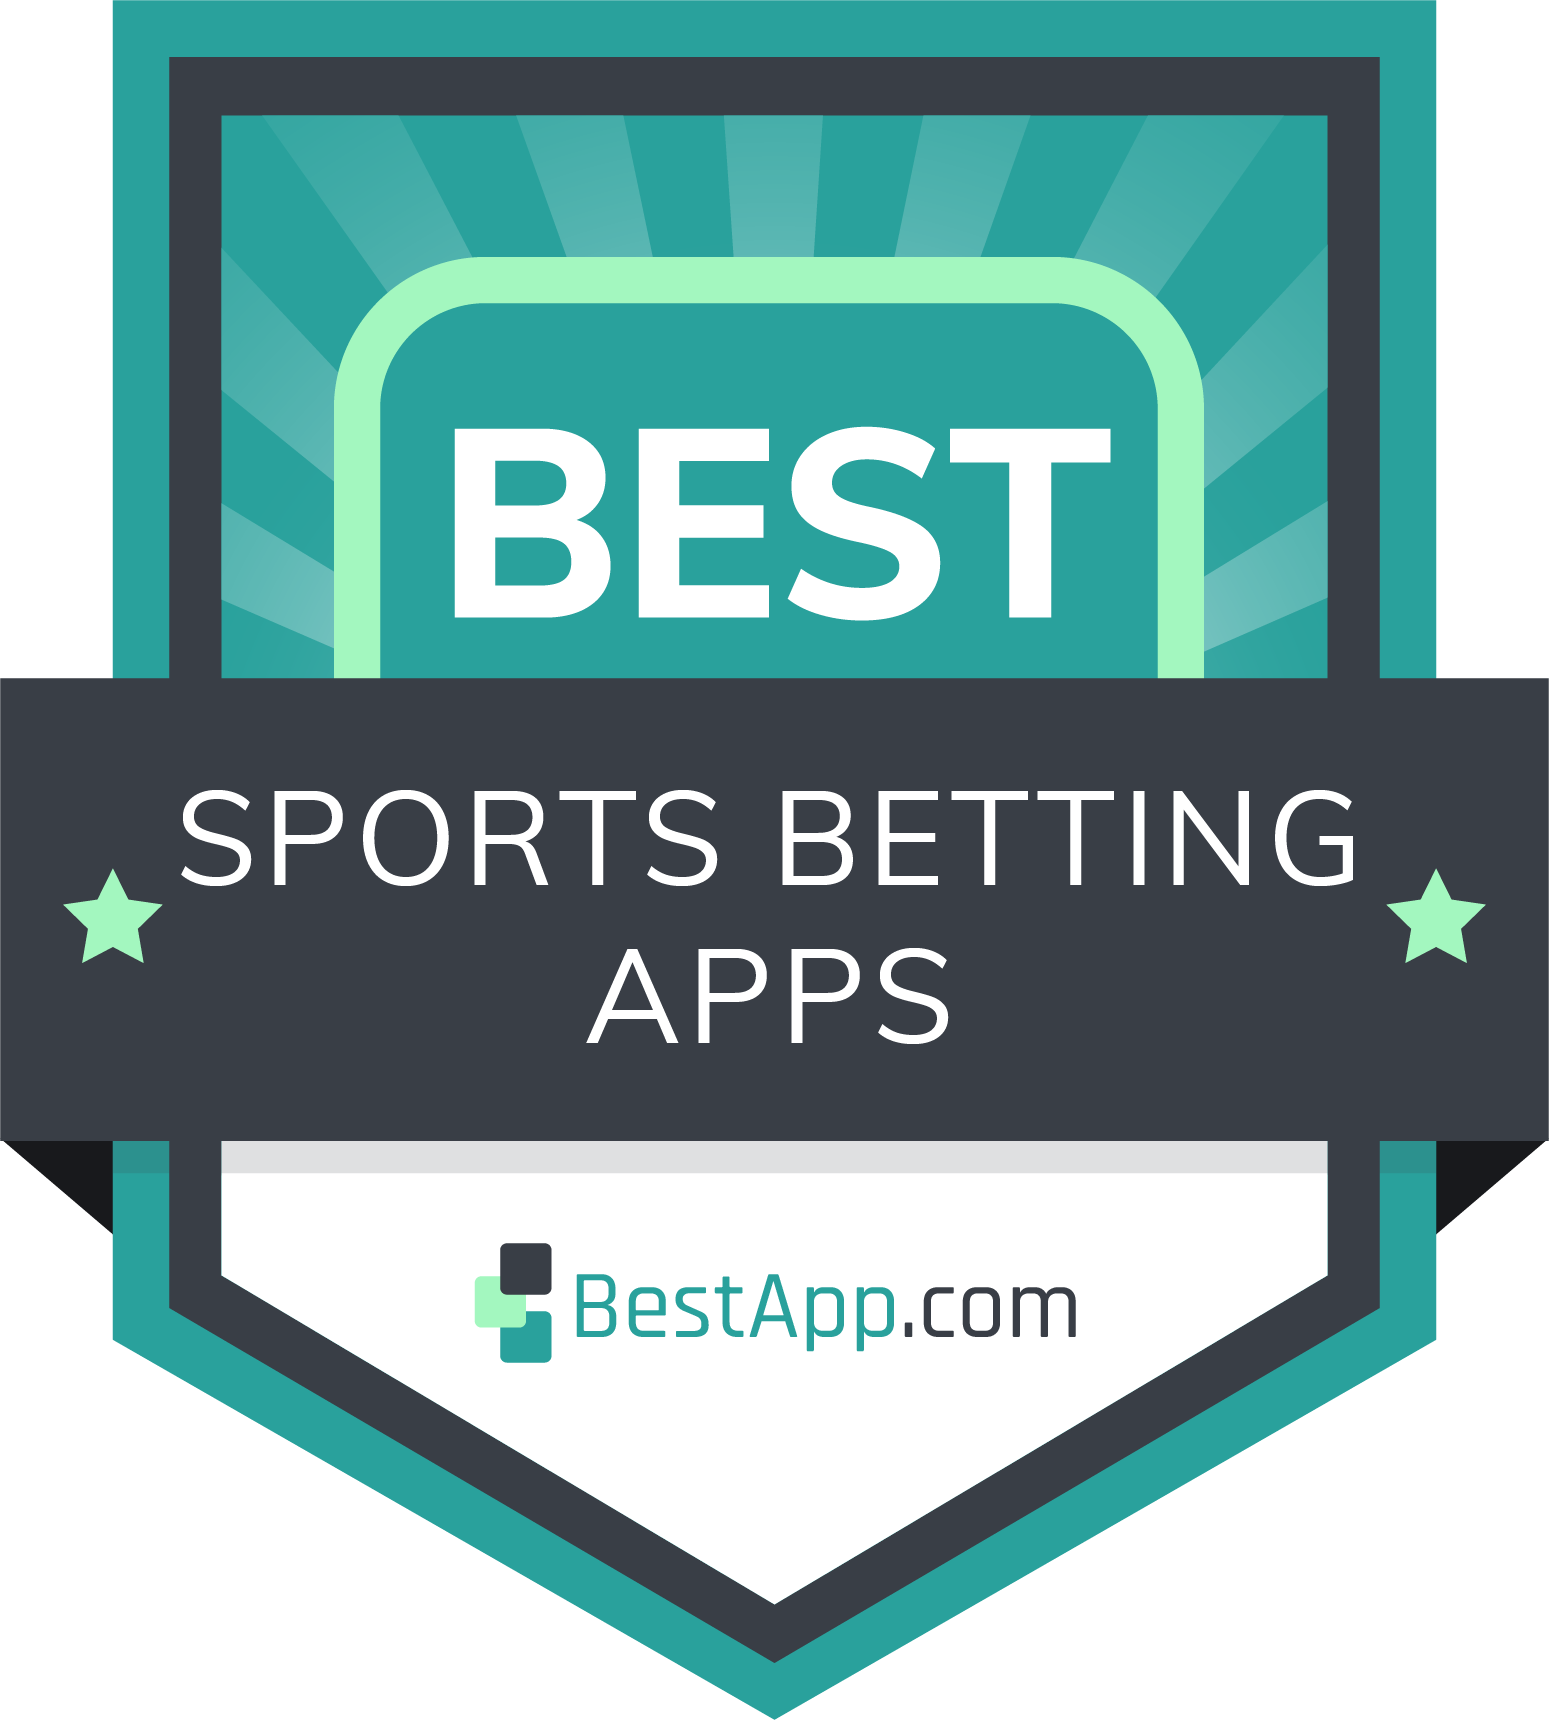 What Do You Want Best Online Betting Apps In India To Become?